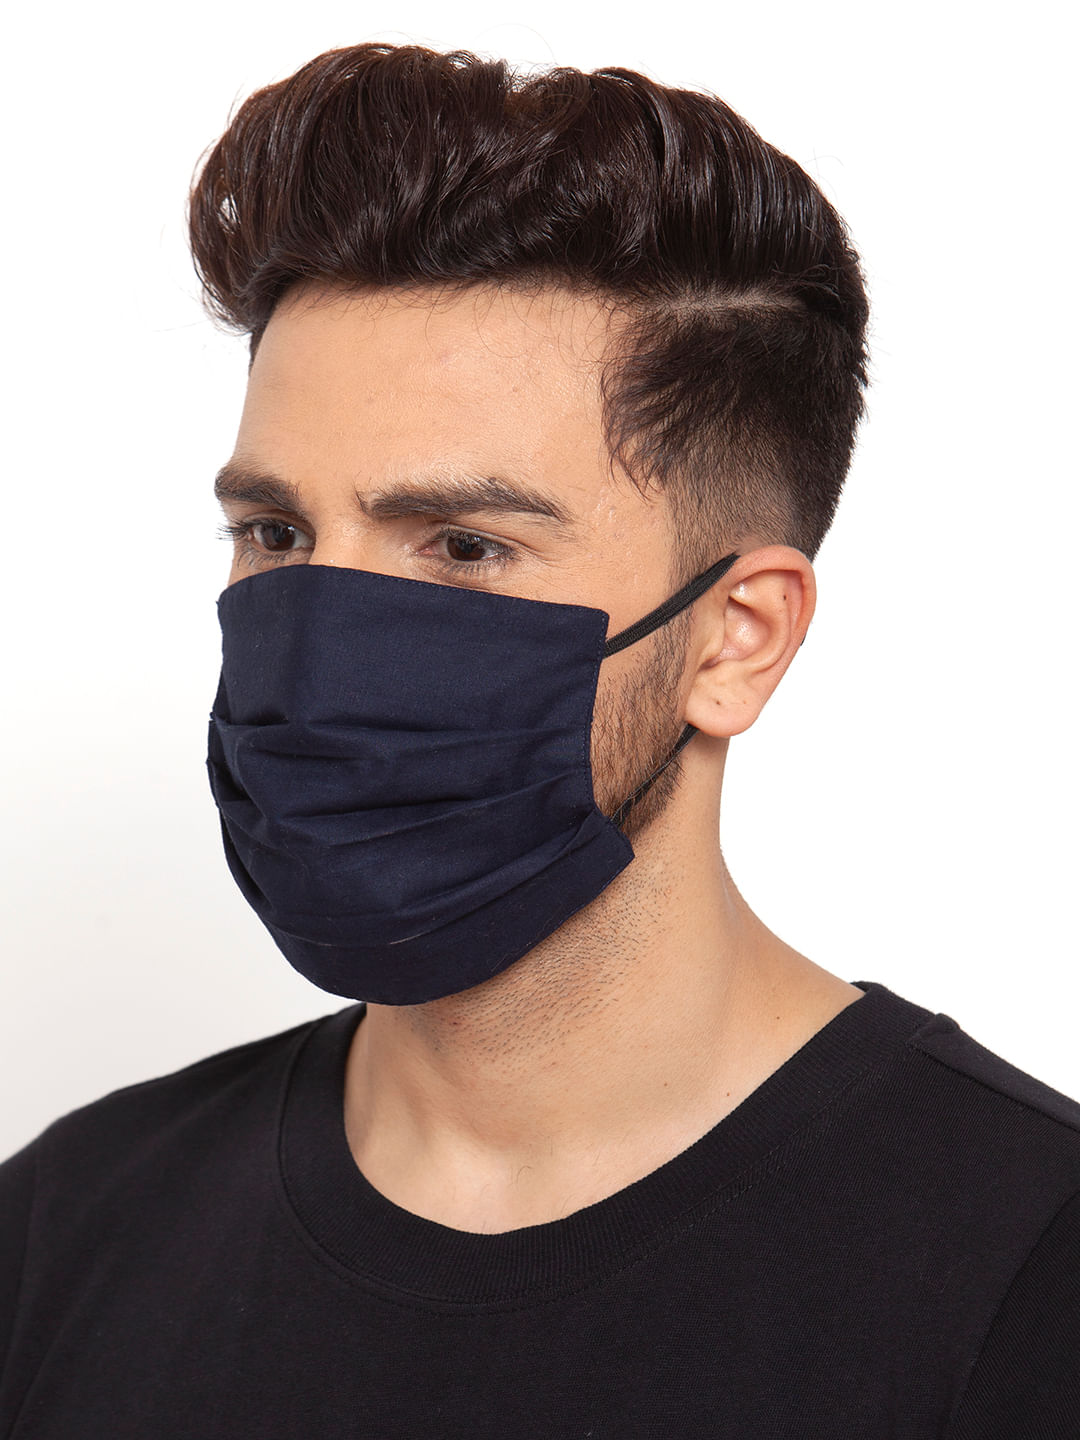 Unisex 3-Layer Adjustable & Stretchable Protective Mask with Ear Loops - Size L - Set of 3